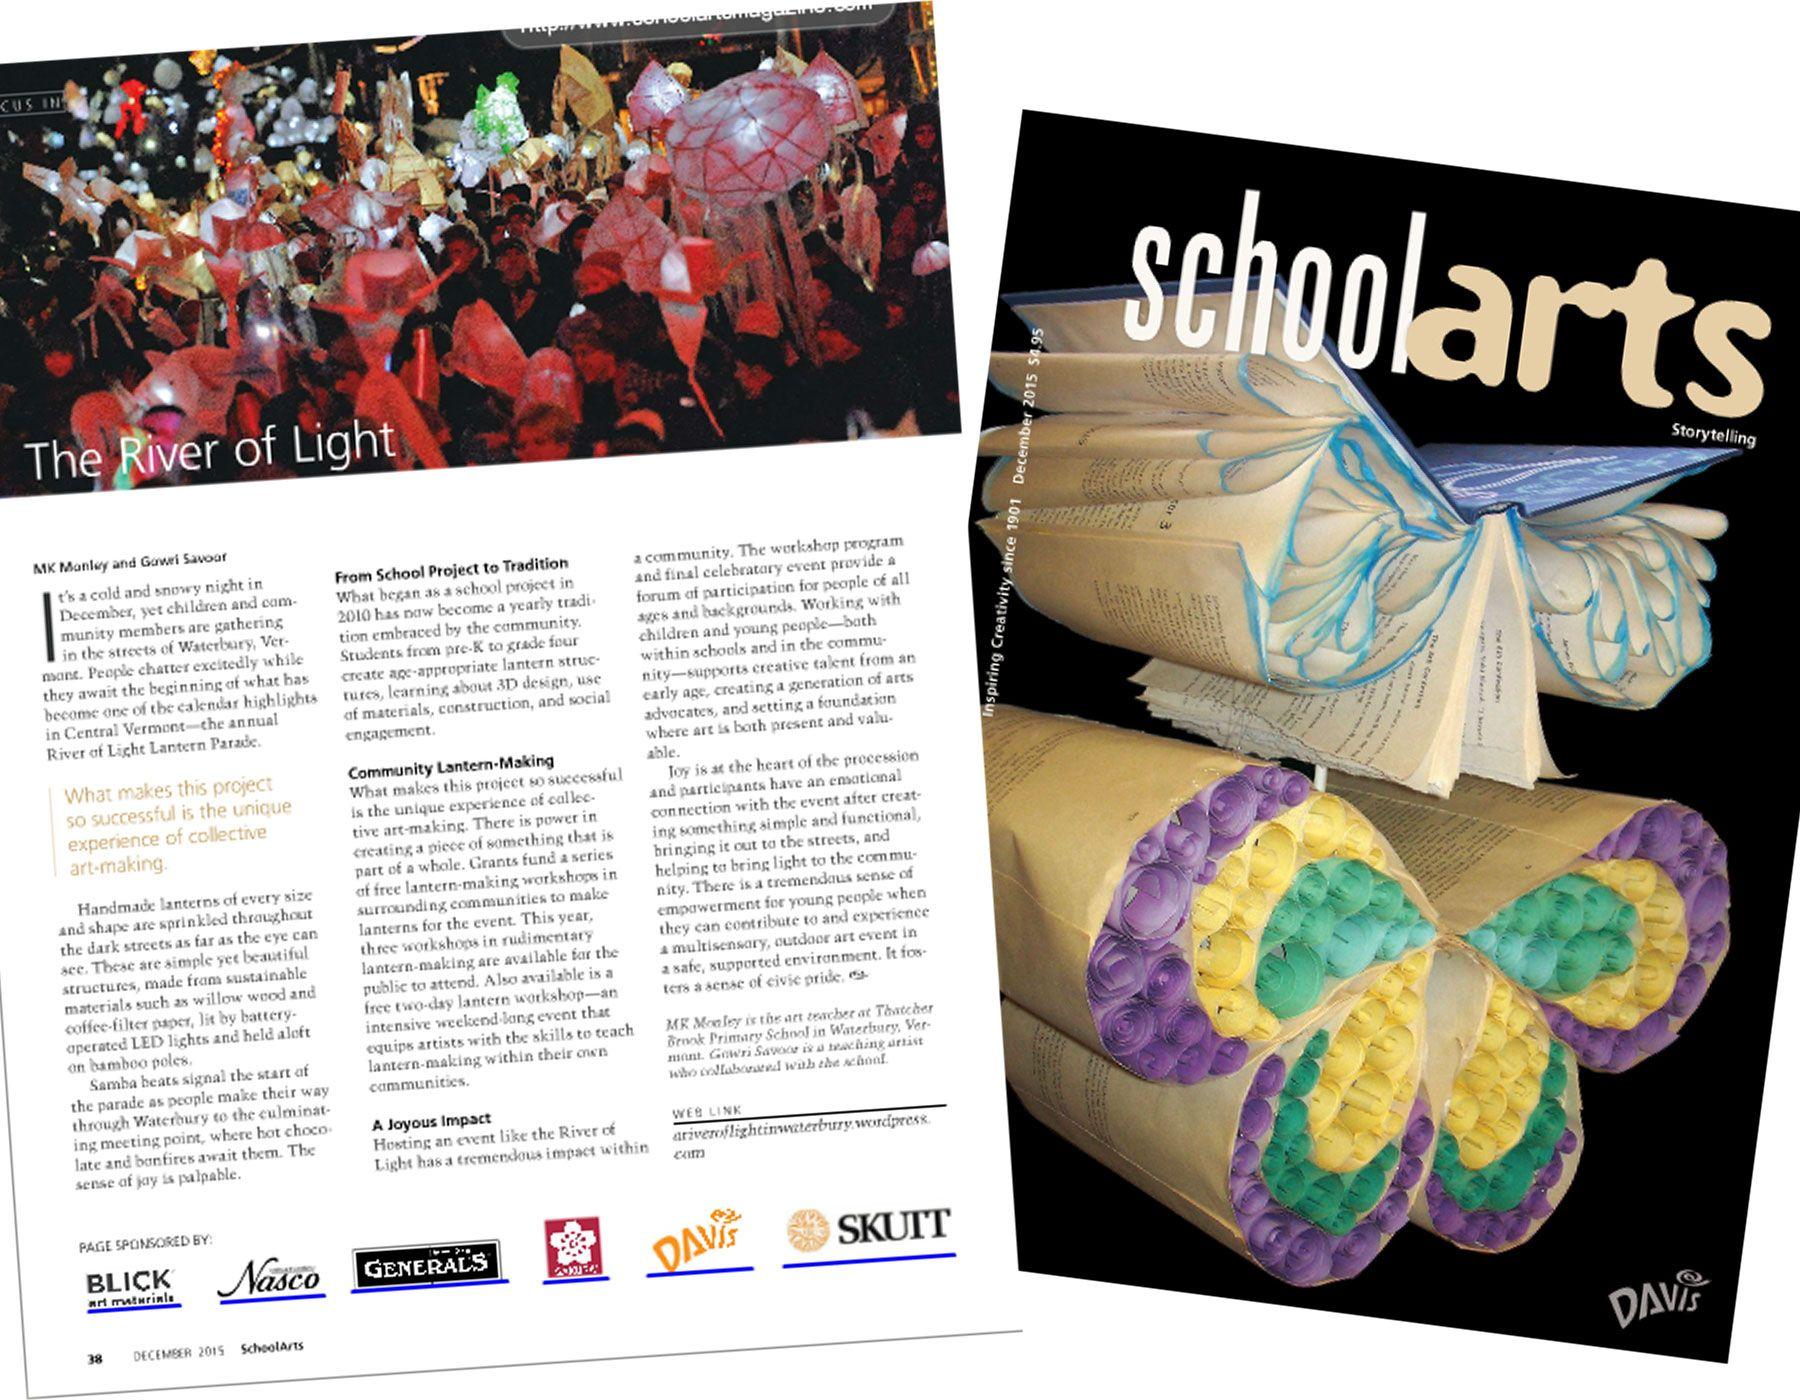 School Arts Magazine Logo - School Arts Magazine article. A River of Light in Waterbury